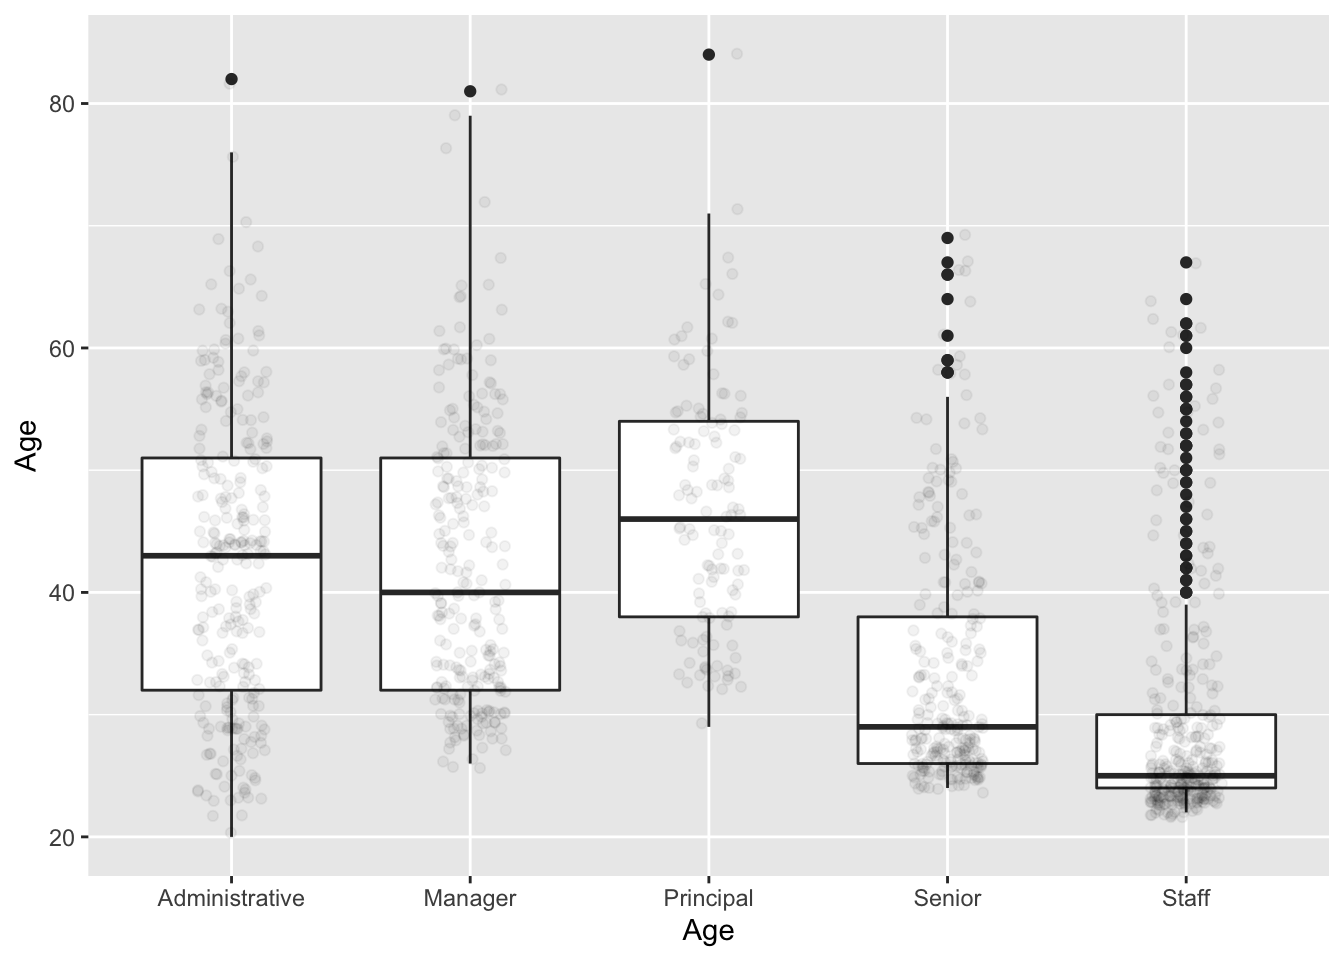 Side-by-side boxplots comparing the ages of the terminated and retained employees of different levels of employees.